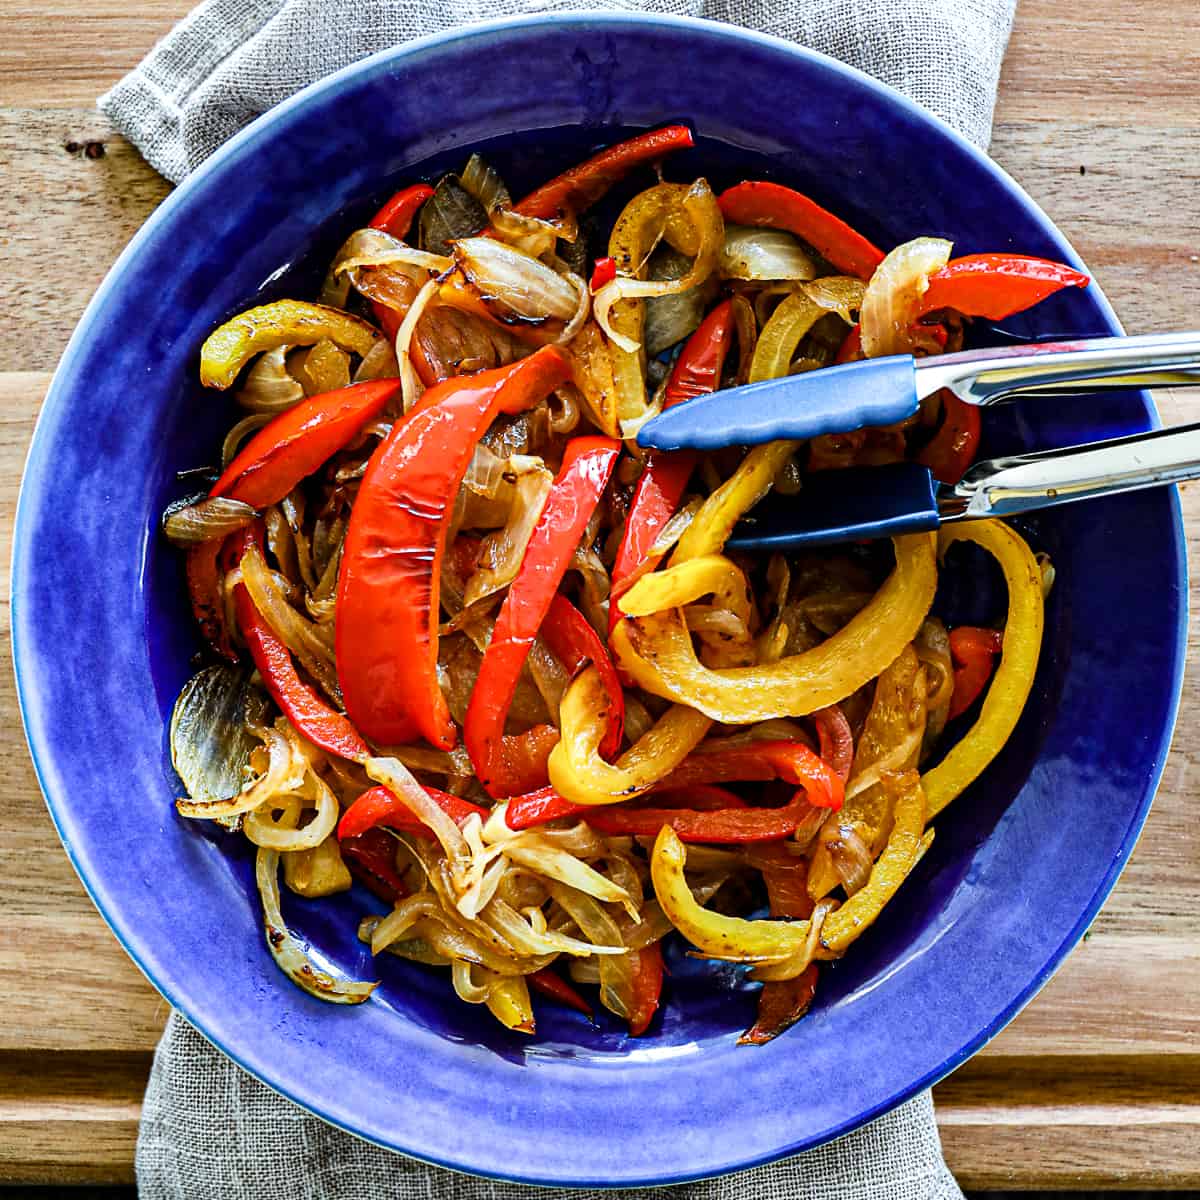 https://sipbitego.com/wp-content/uploads/2021/06/Sauteed-Onions-And-Peppers-For-Fajitas-Steak-Sides-Sip-Bite-Go-feature.jpg